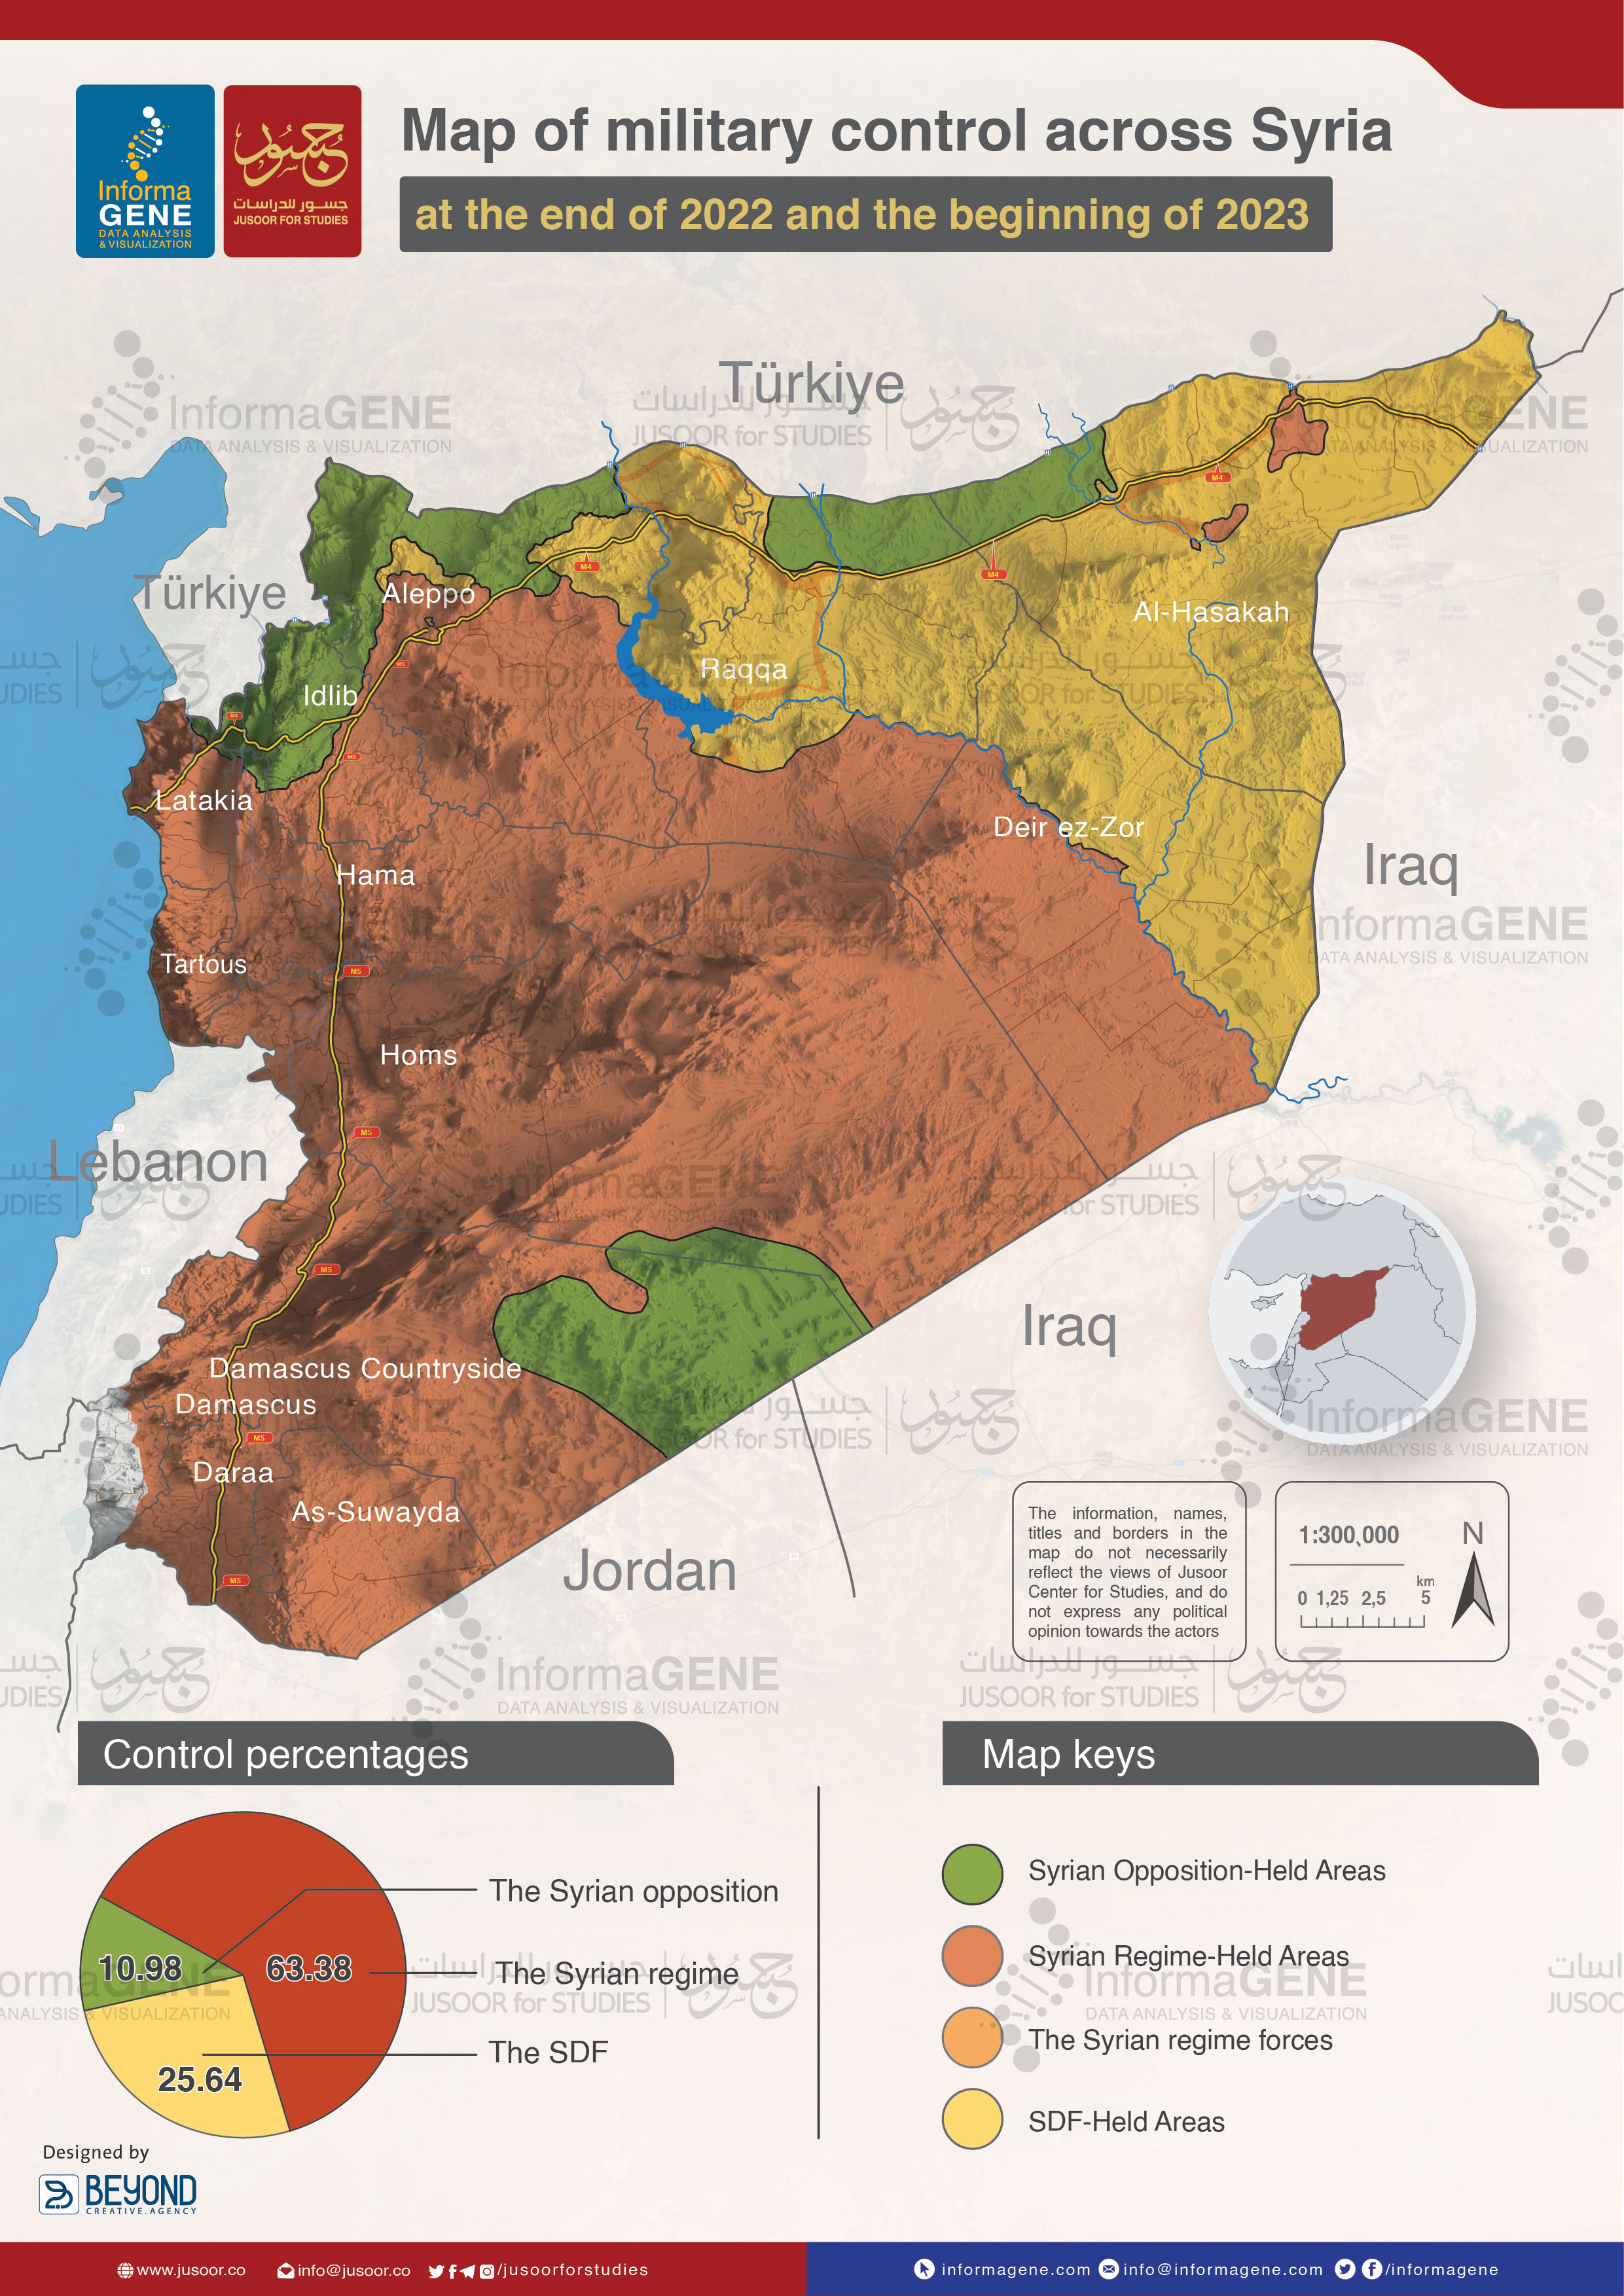 Map of military control across Syria at the end of 2022 and the beginning  of 2023